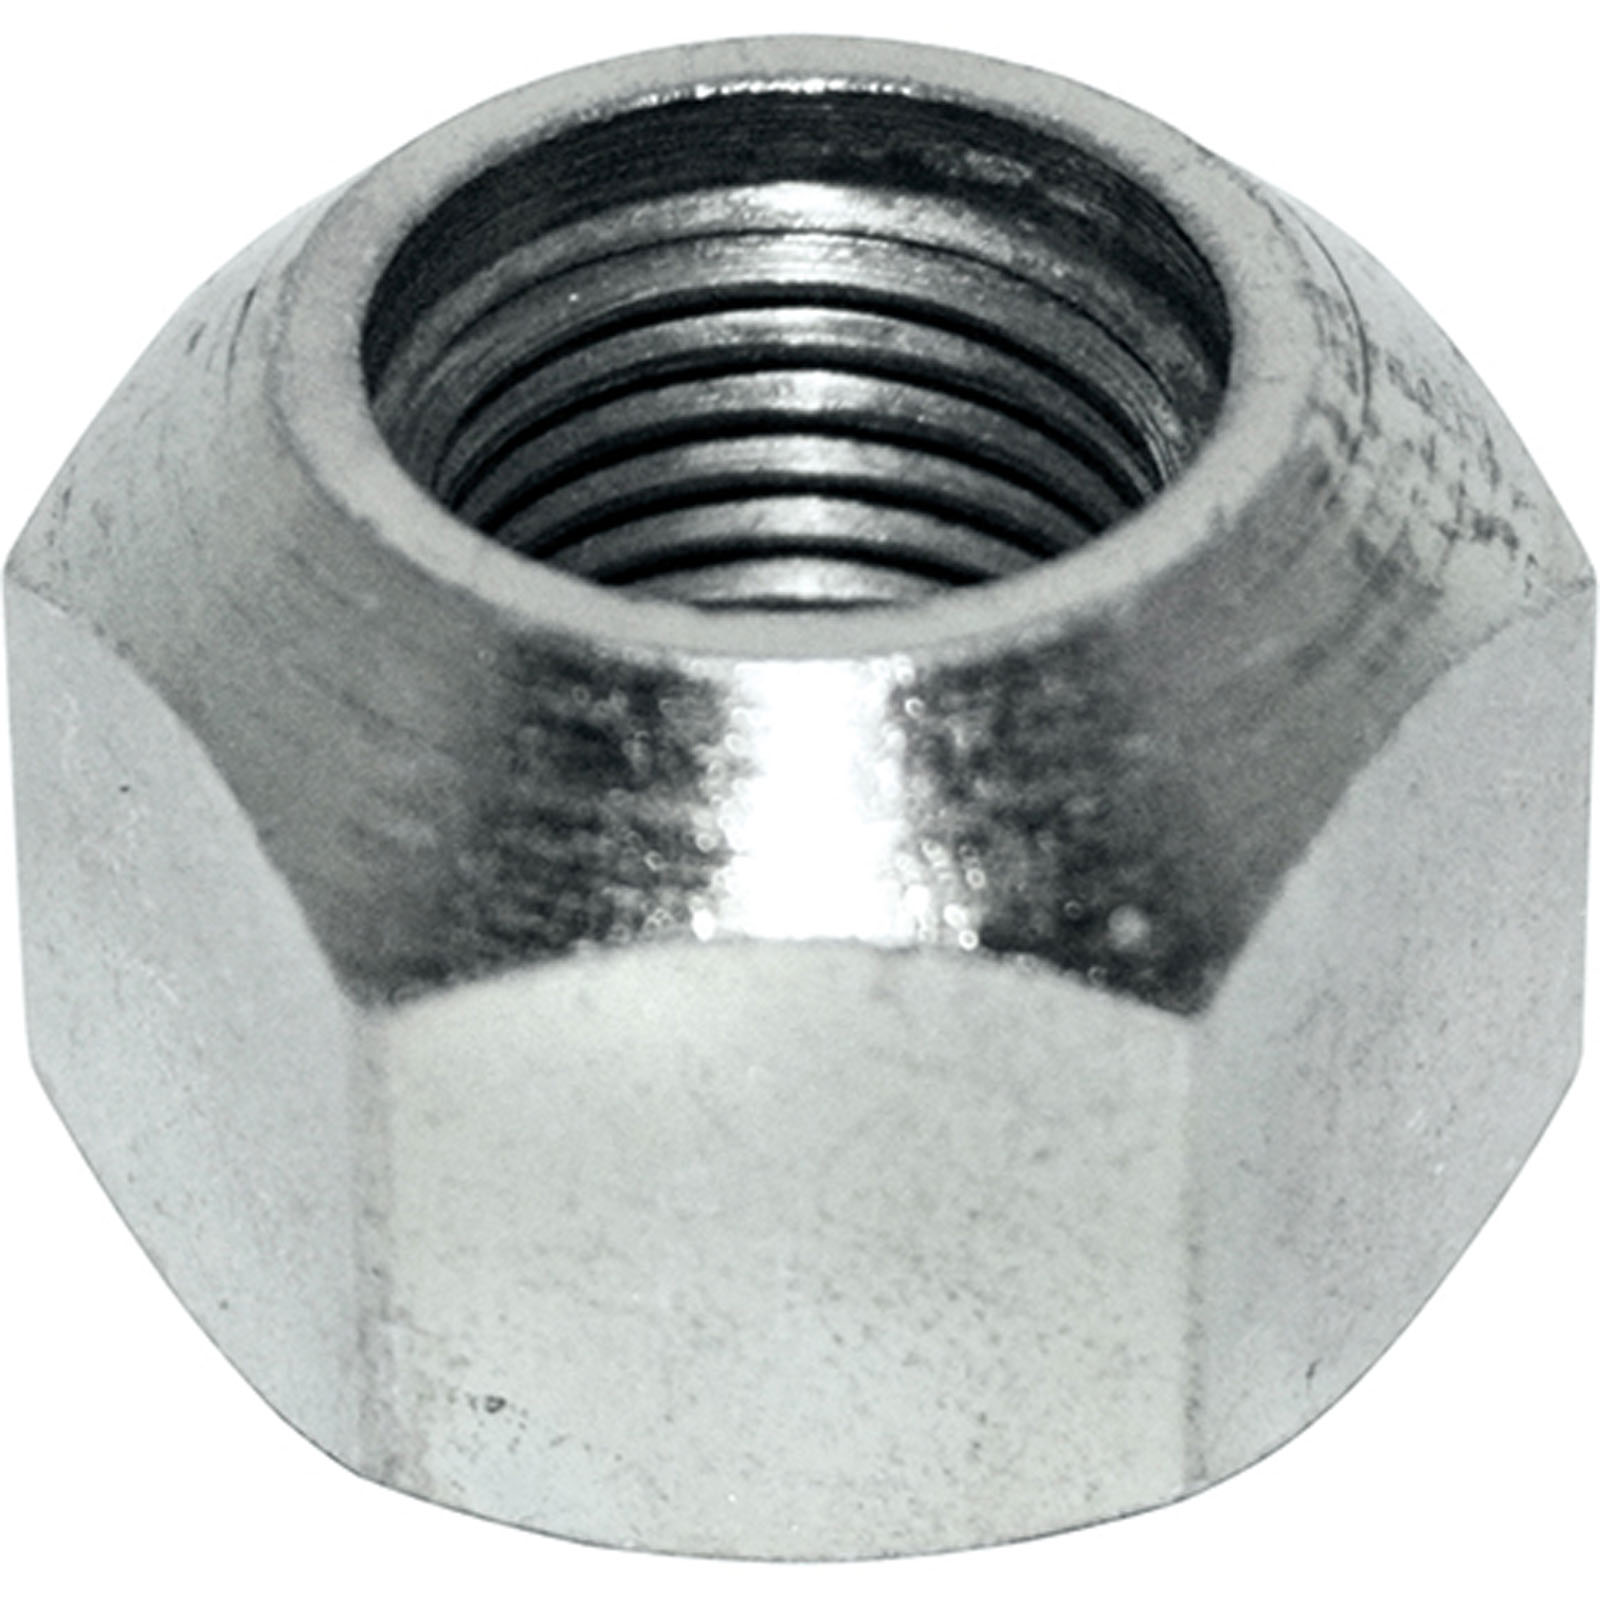 New Holland Nut Part # 81815739 